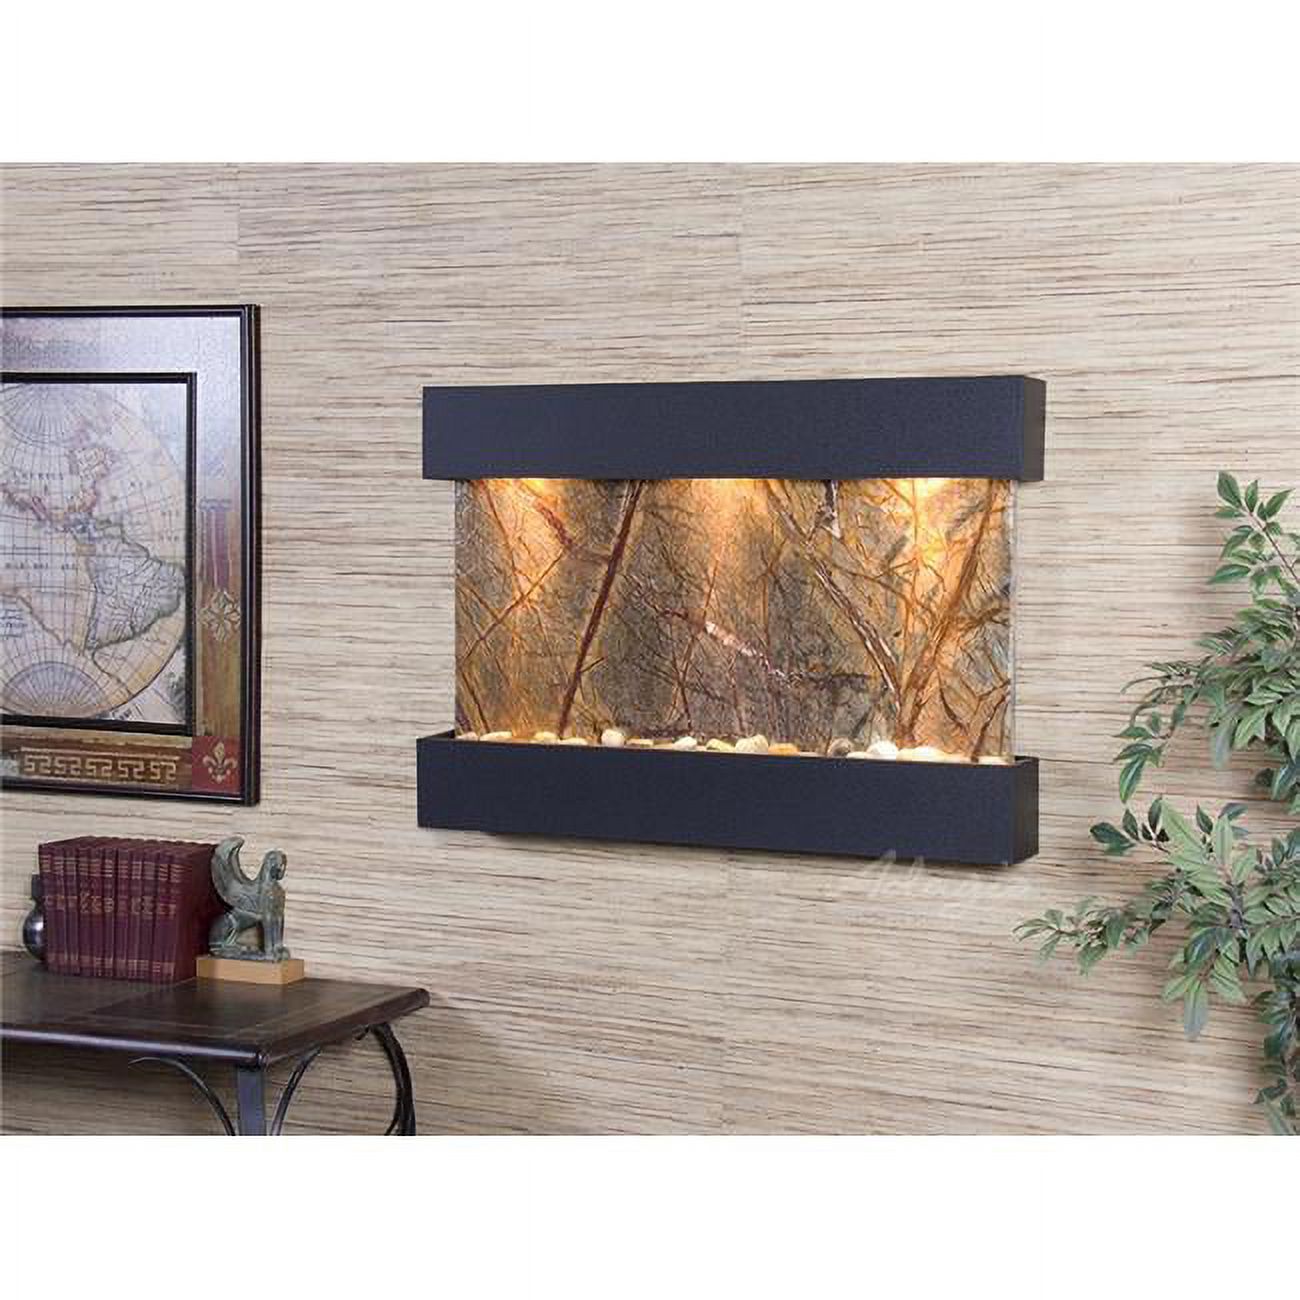 Adagio RCS1706 Reflection Creek Textured Black Brown-Marble Wall Fountain - image 1 of 2